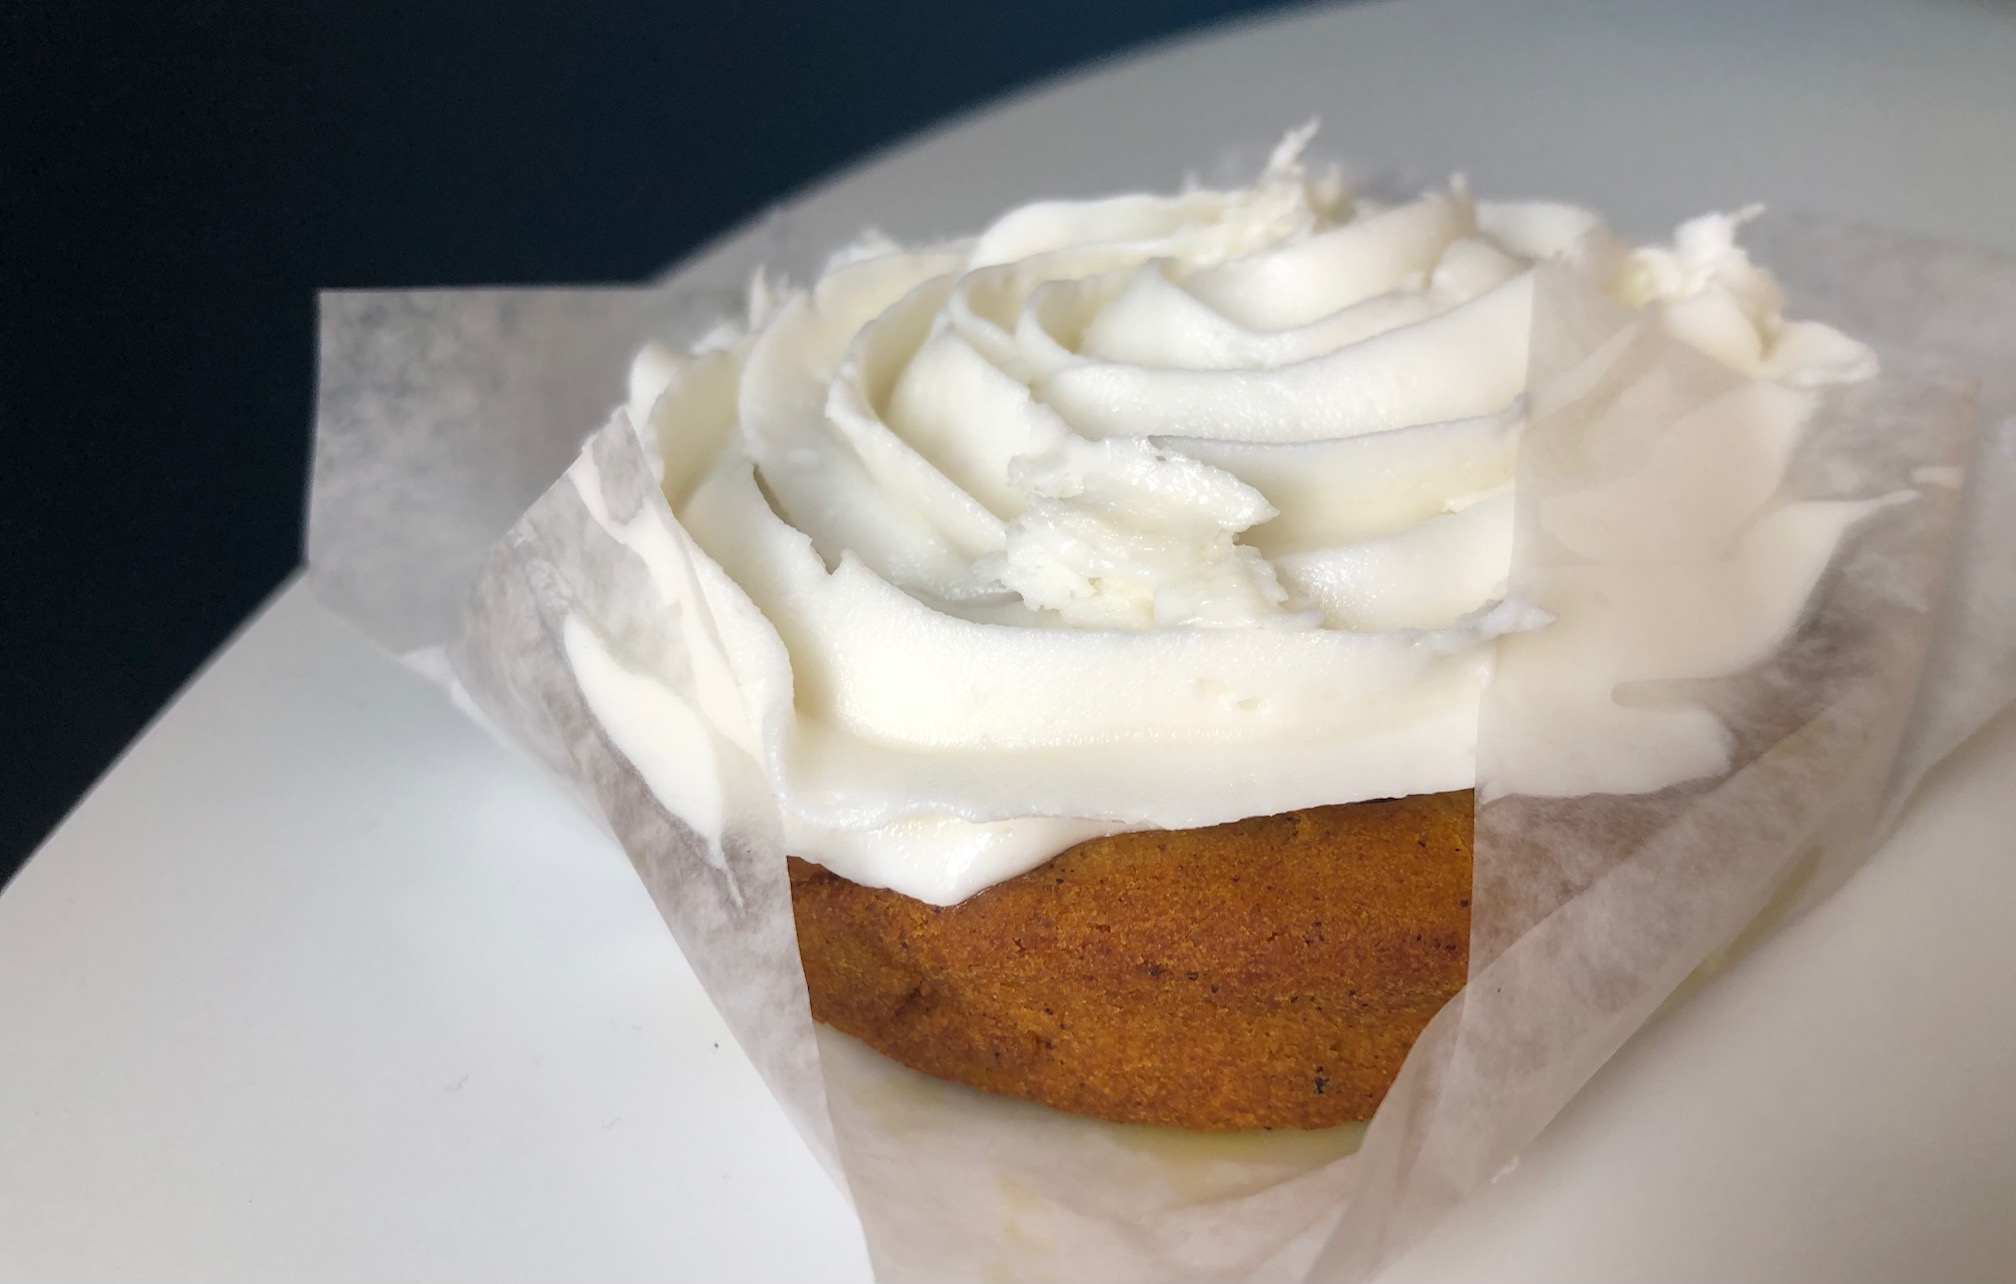 In a piece of white parchment paper, there is a pumpkin spicebush cake with cream cheese frosting. Photo by Alyssa Buckley.